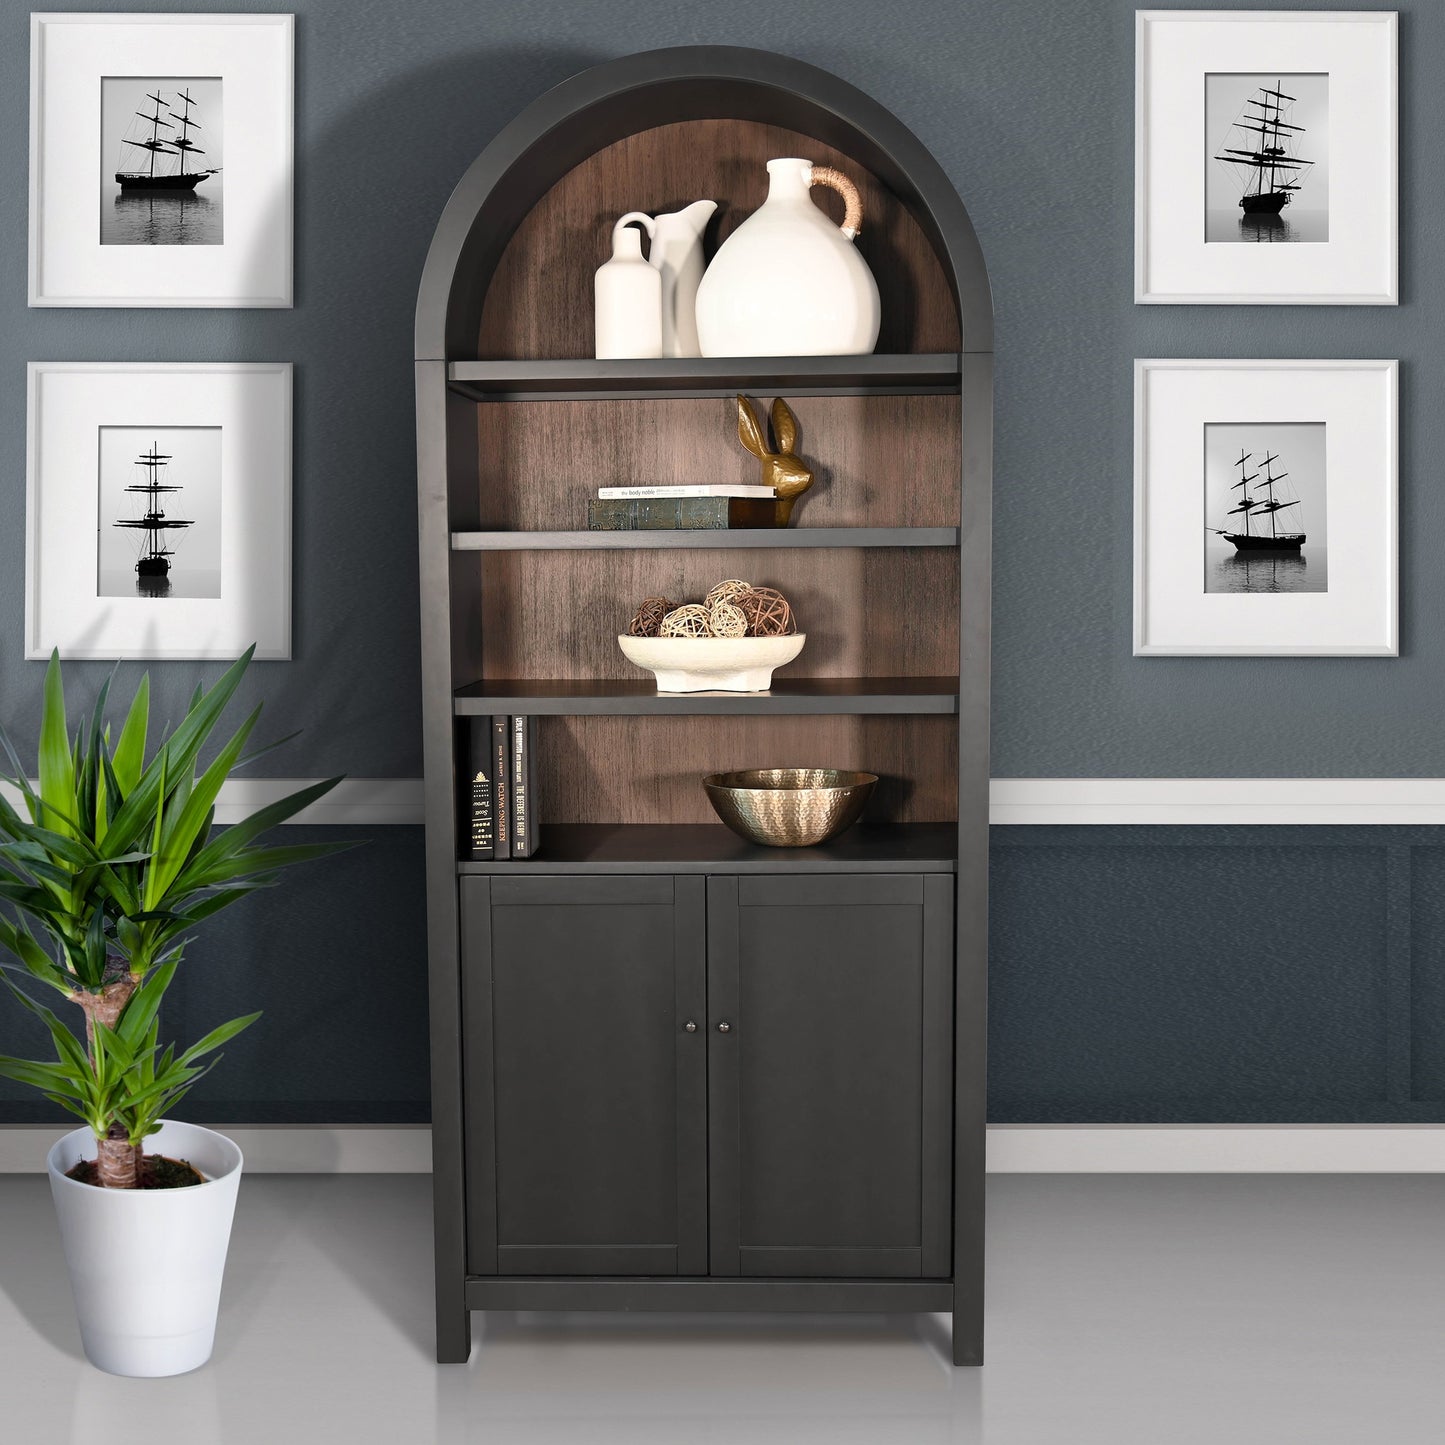 Arched Top Bookshelf Cabinet